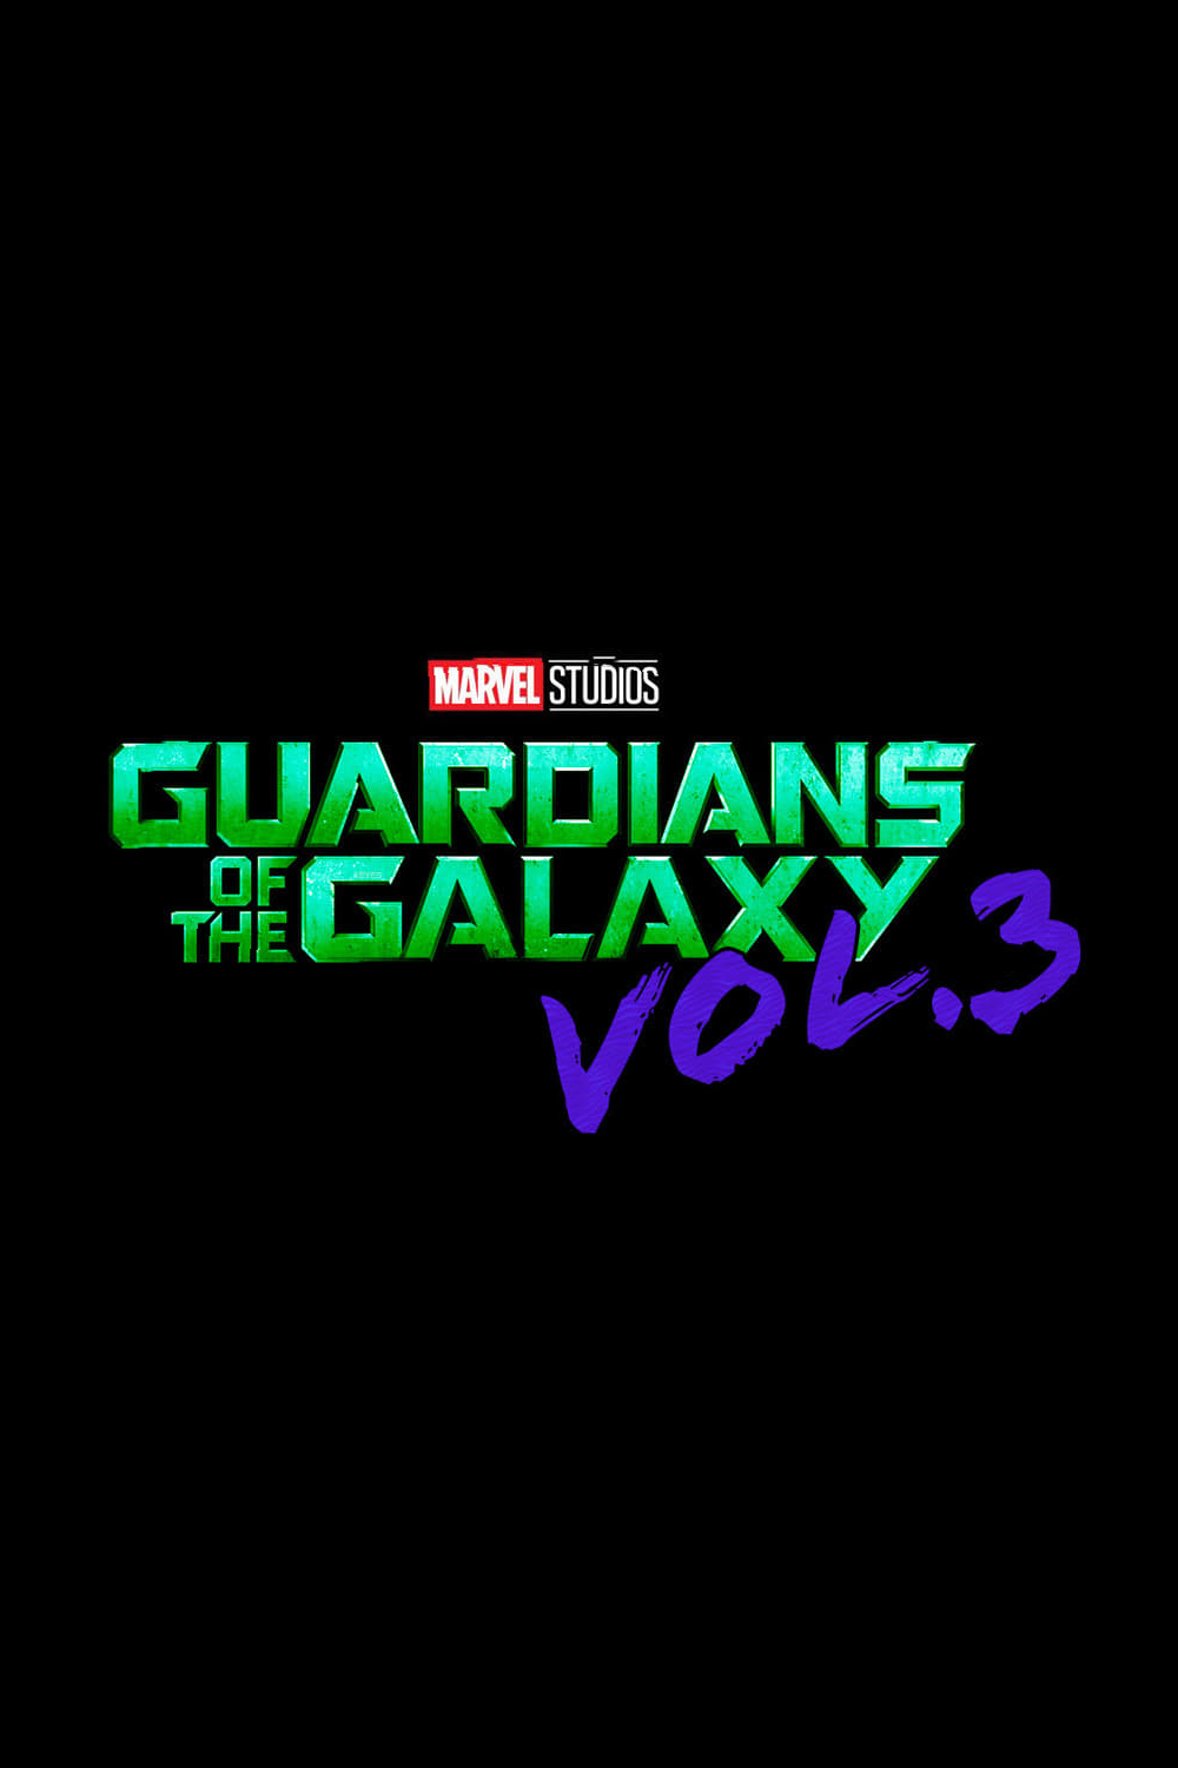 Marvel's Guardians of the Galaxy Vol. 3 Casting